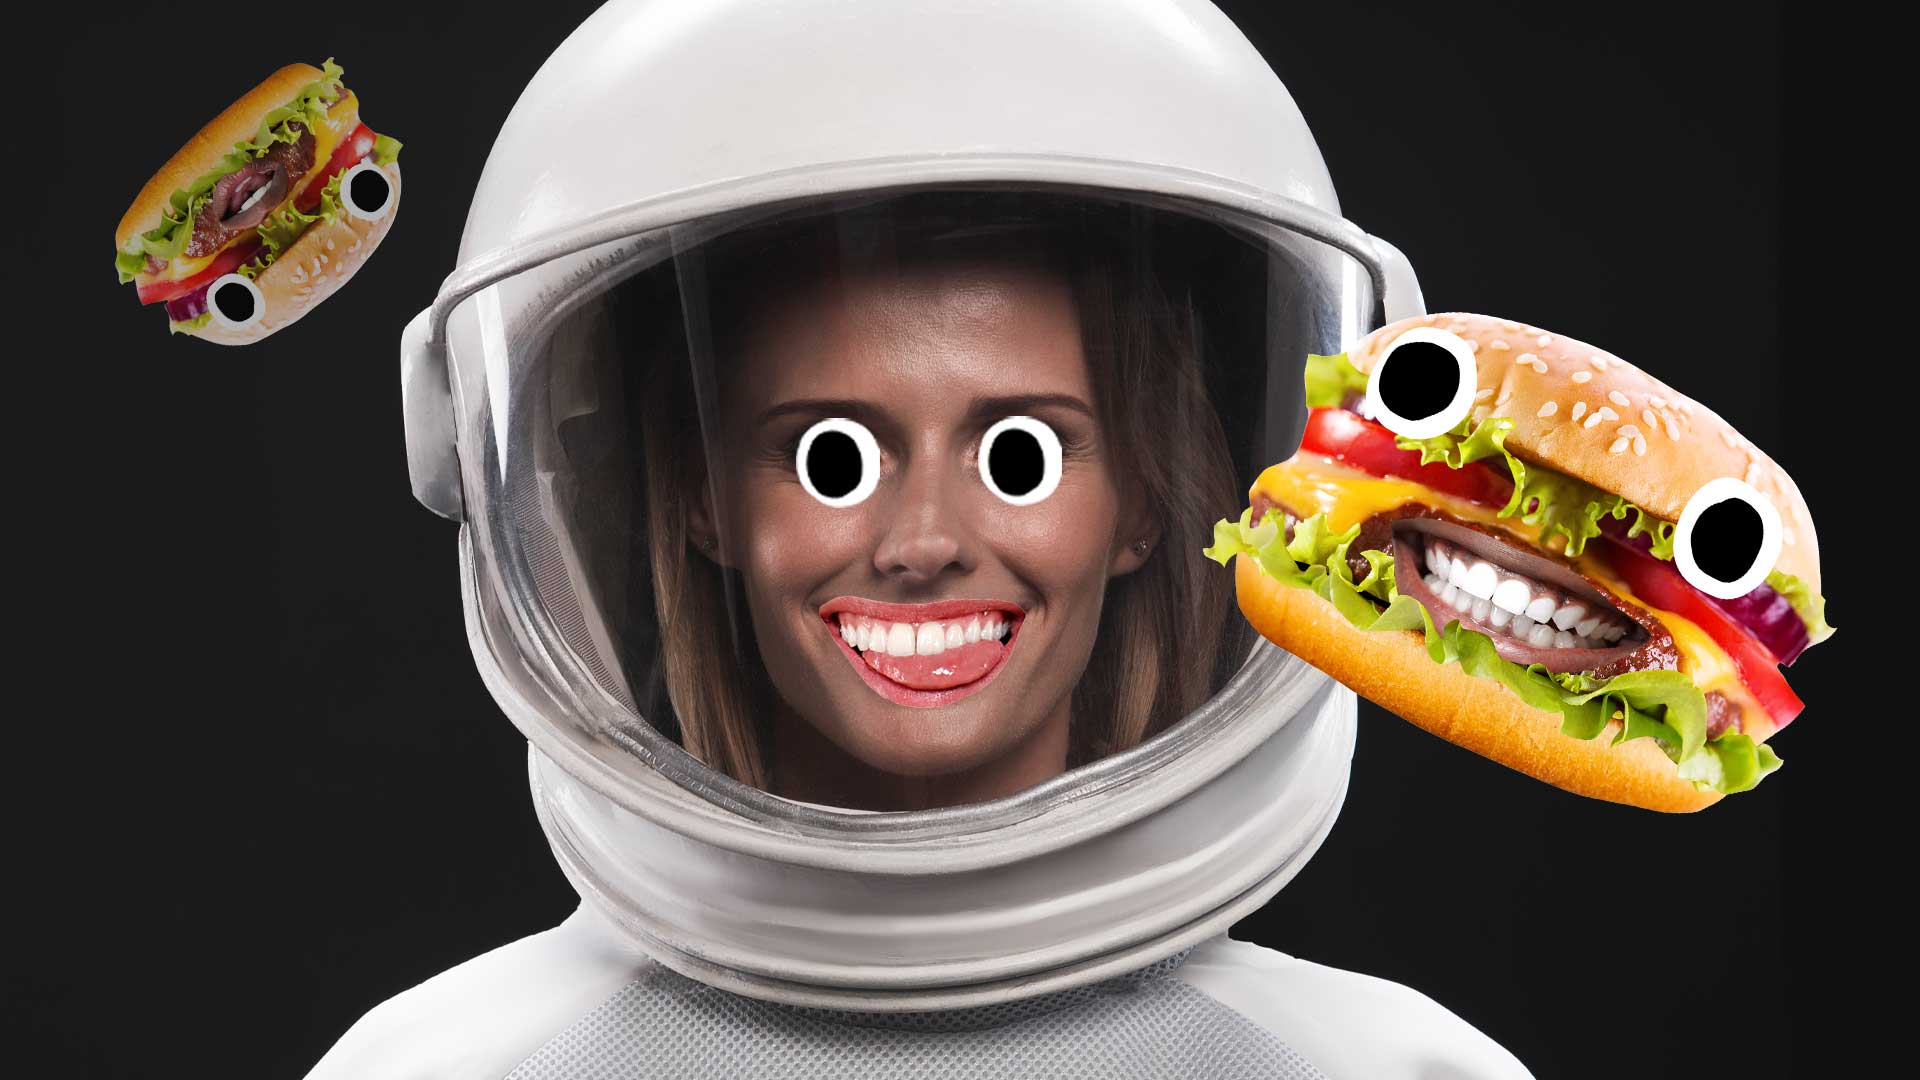 An astronaut surrounded by burgers